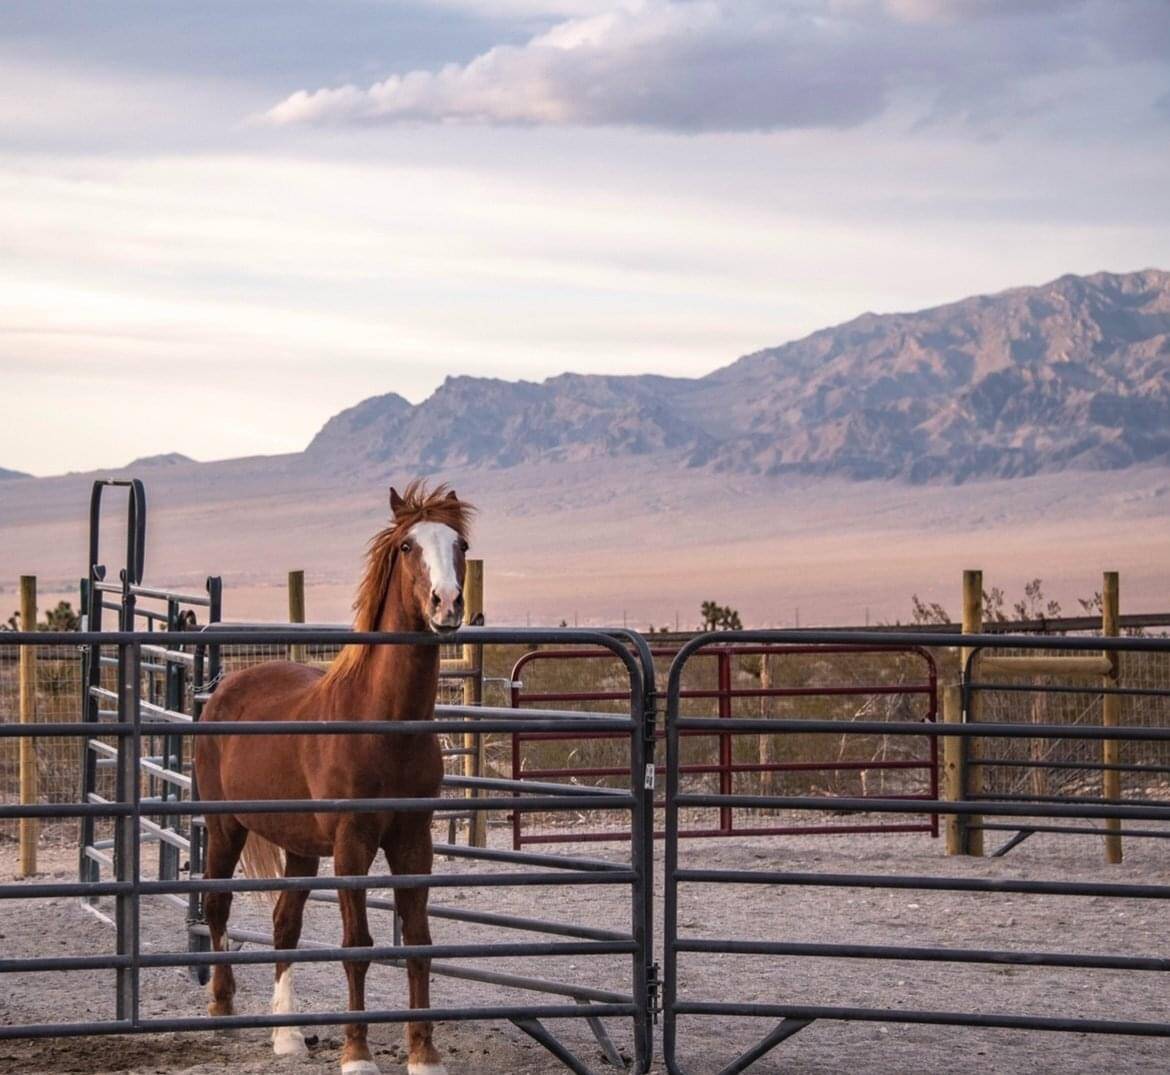 The horse sanctuary managed by the nonprofit Hearts Alive Village is looking to expand its oper ...